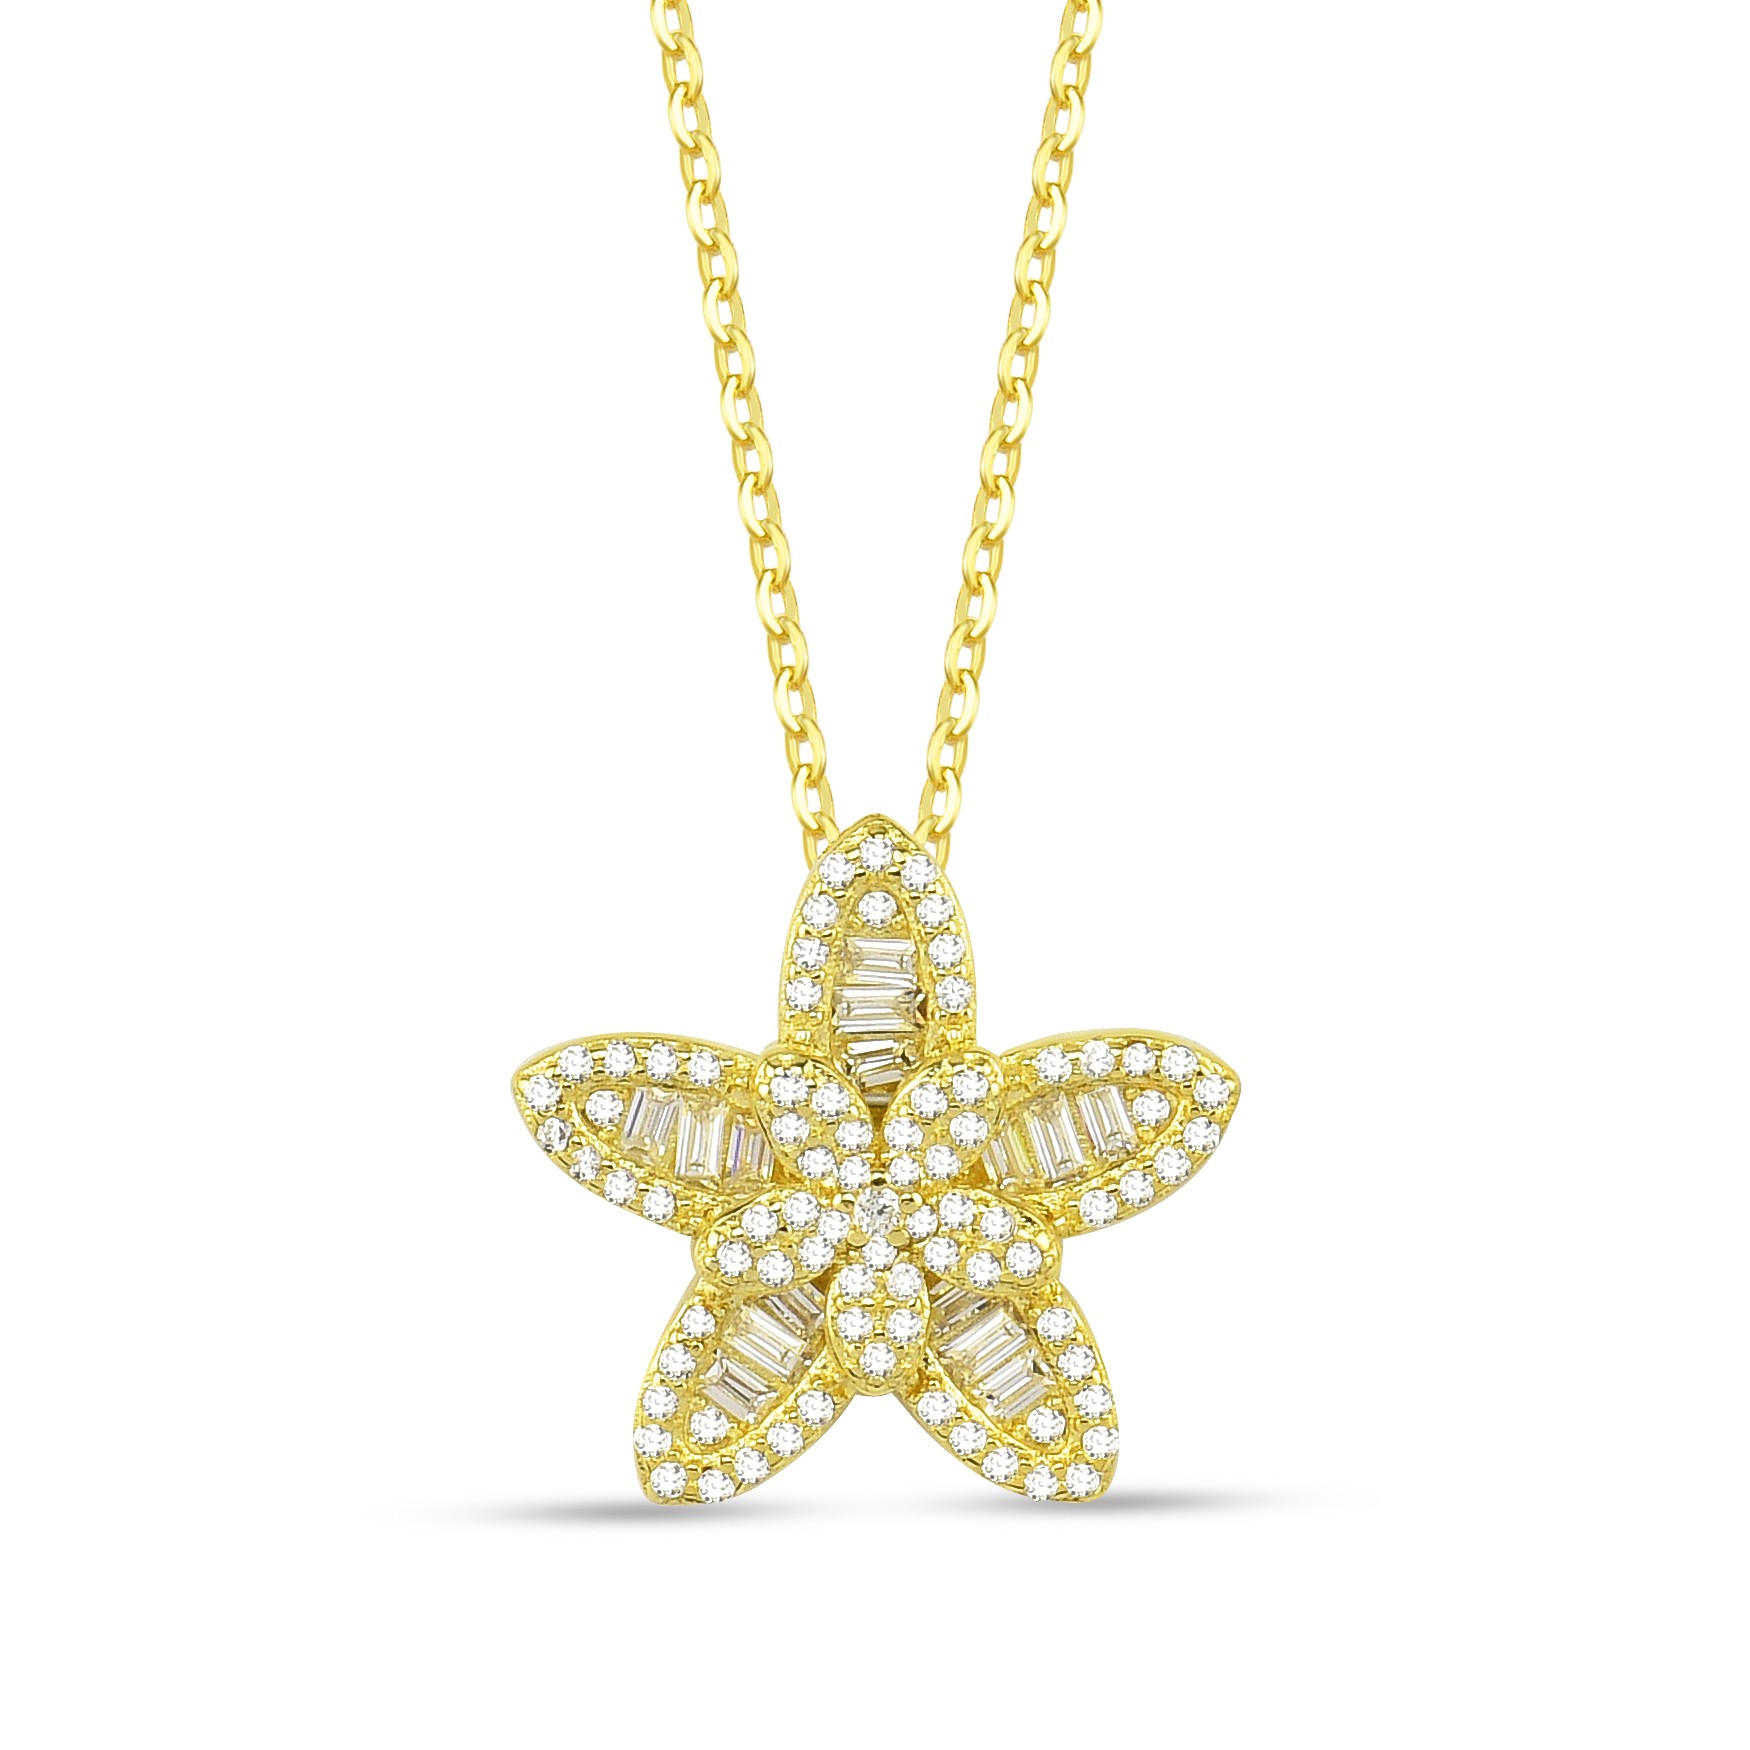 THE BAGUETTE STAR NECKLACE